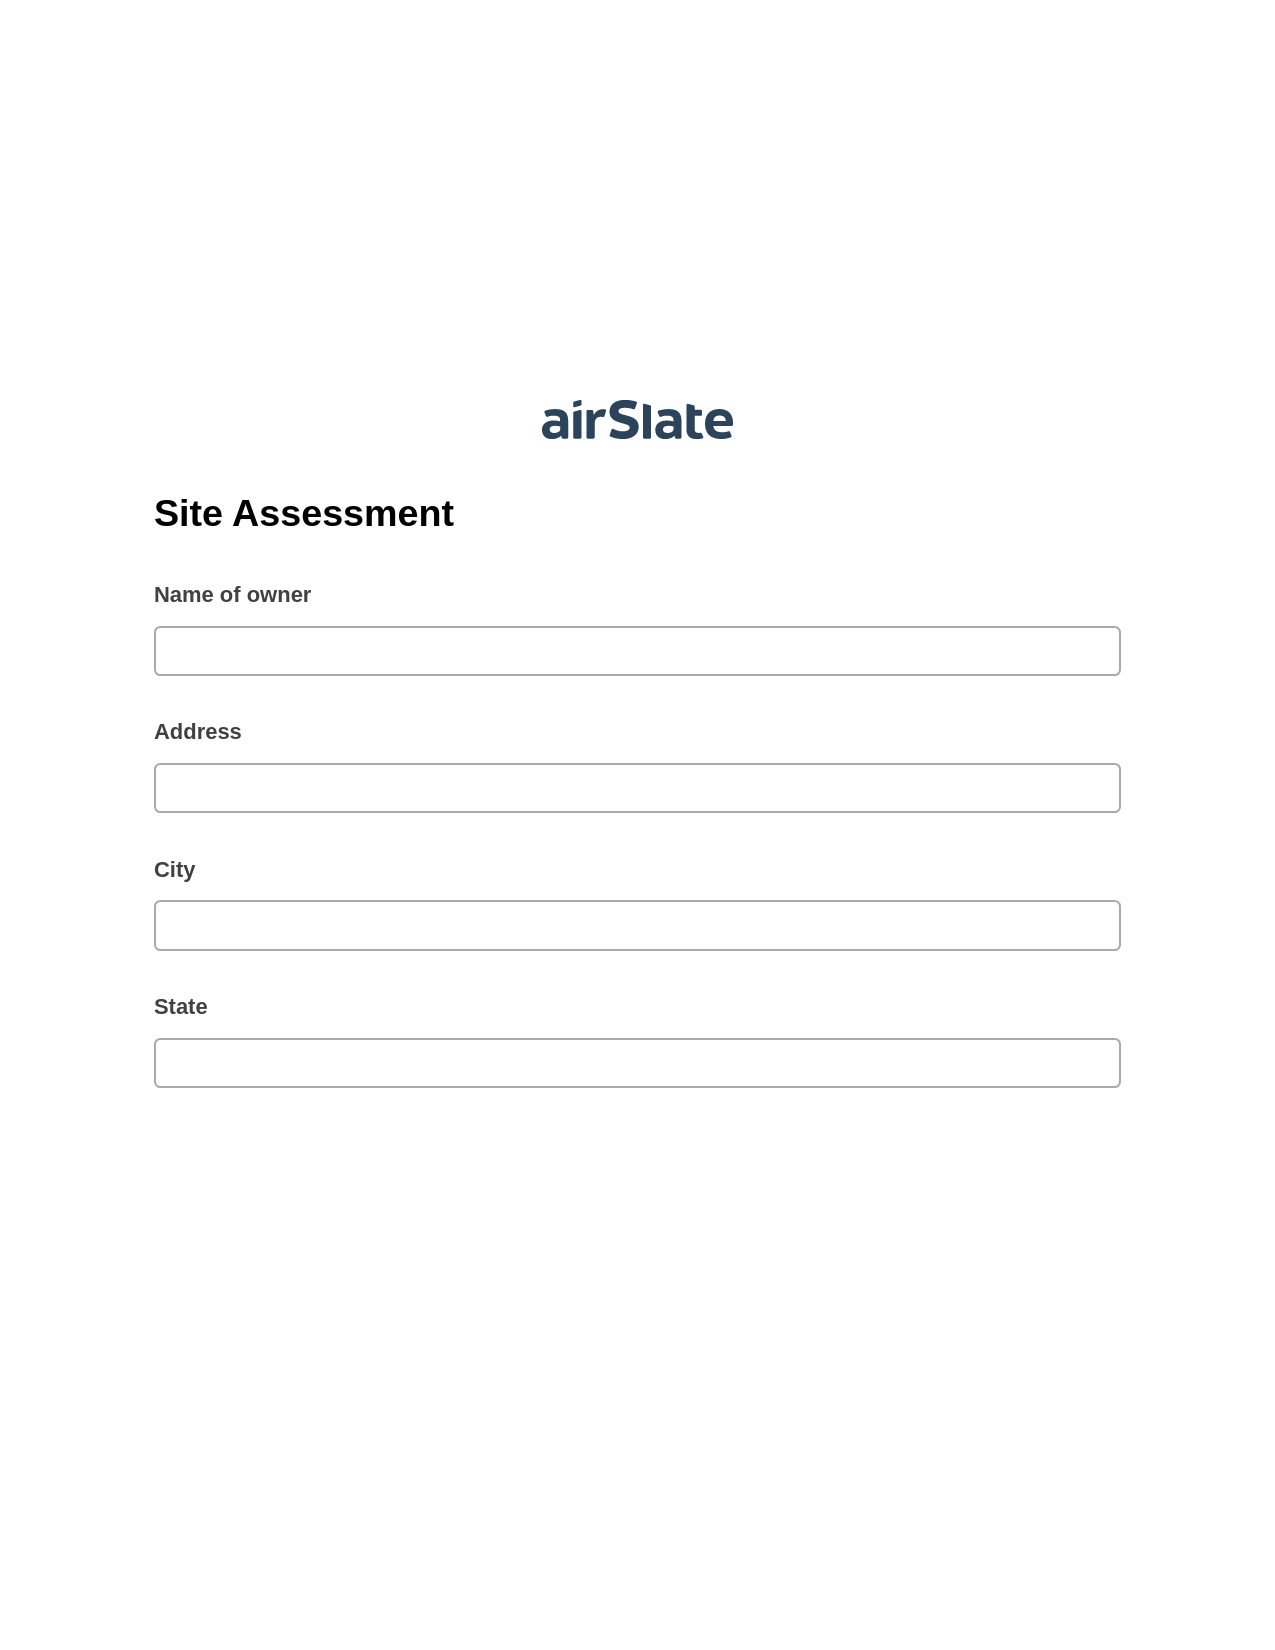 Site Assessment Pre-fill from another Slate Bot, Open as Role Bot, Export to Formstack Documents Bot